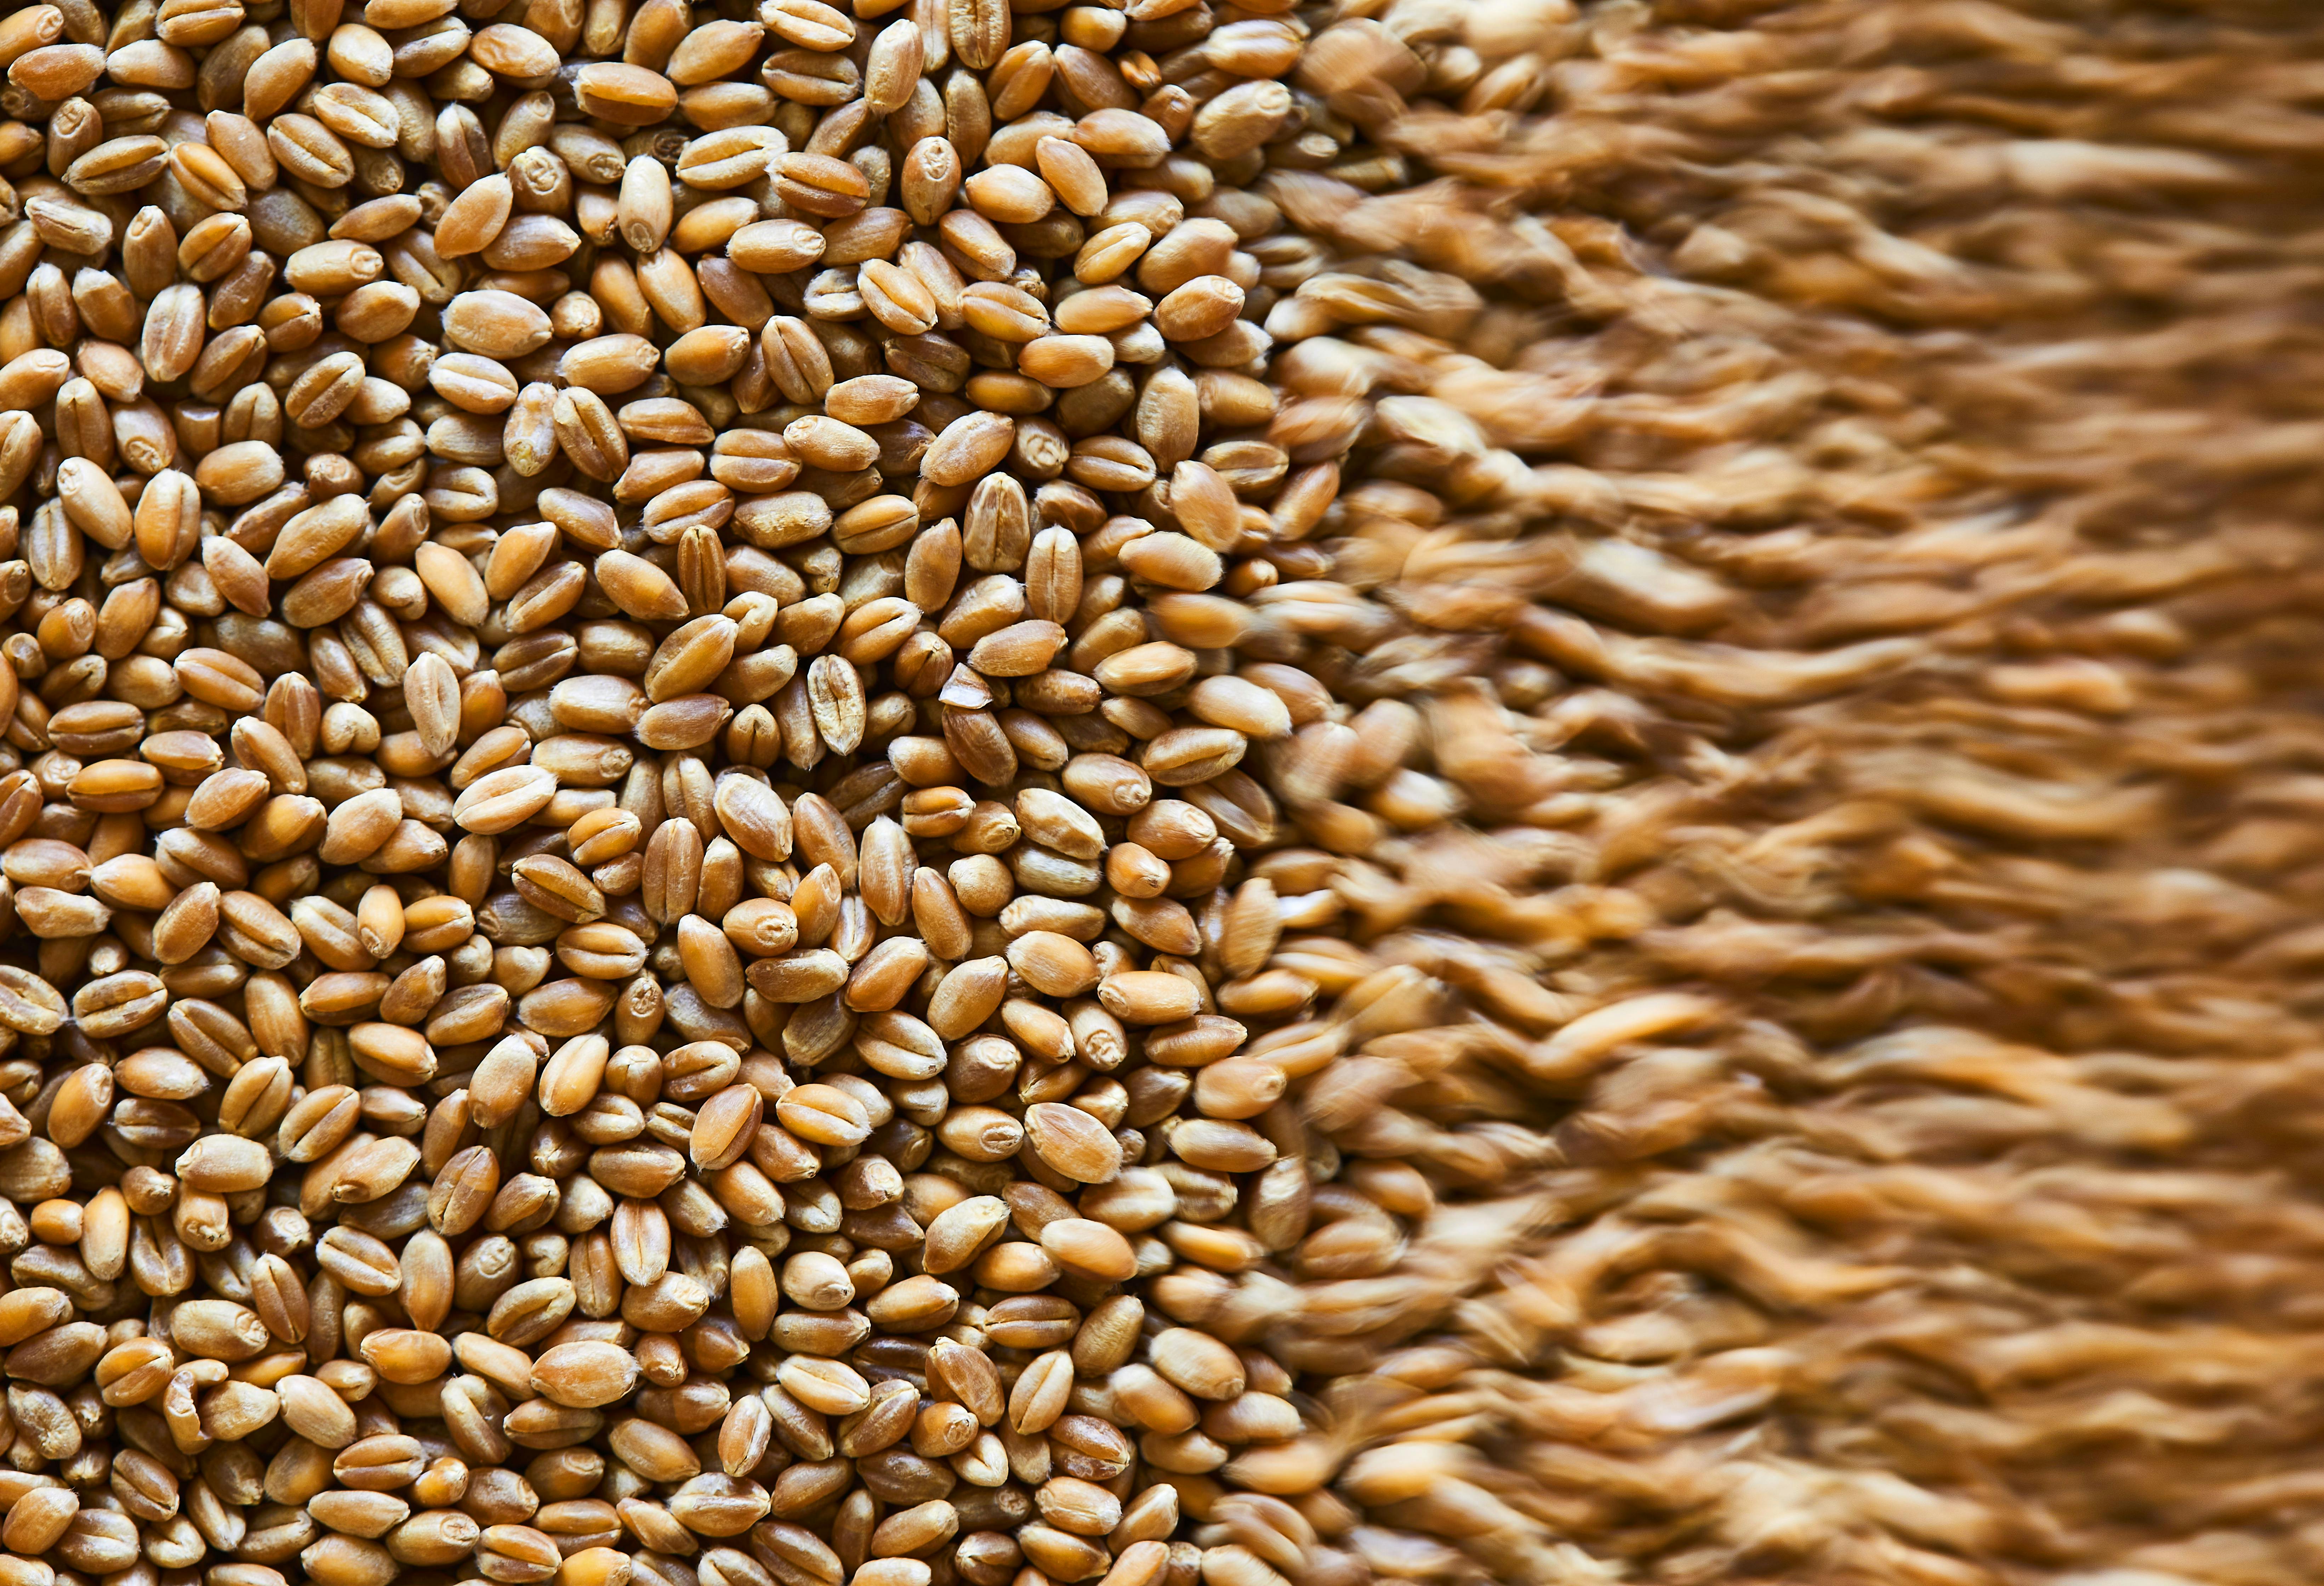 Close-up of a large amount of wheat grains